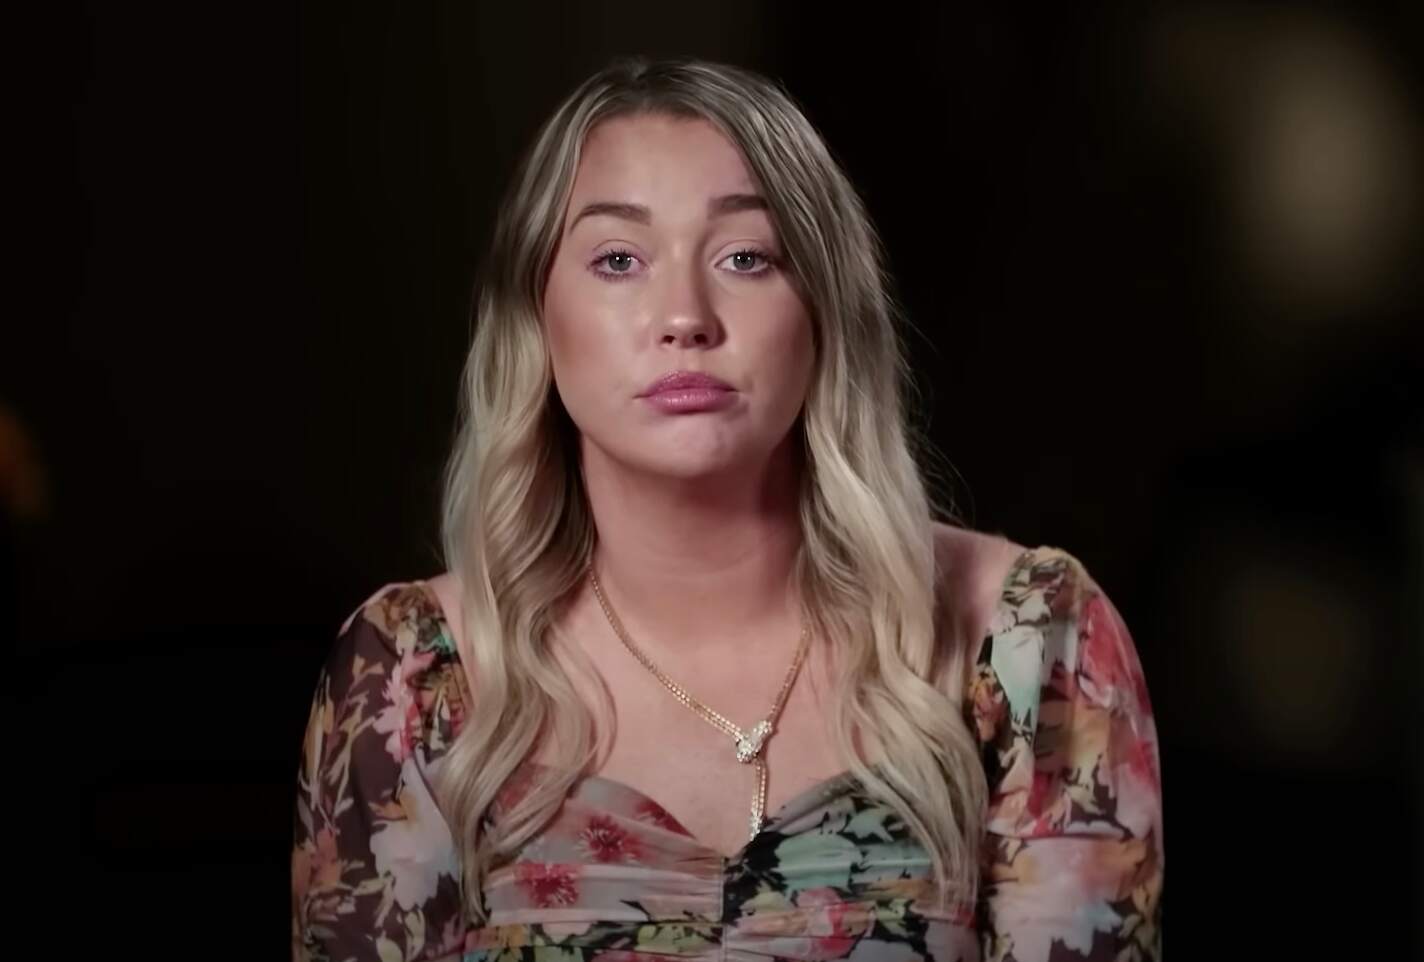 Skylar gives a confessional-style interview for Love After Lockup